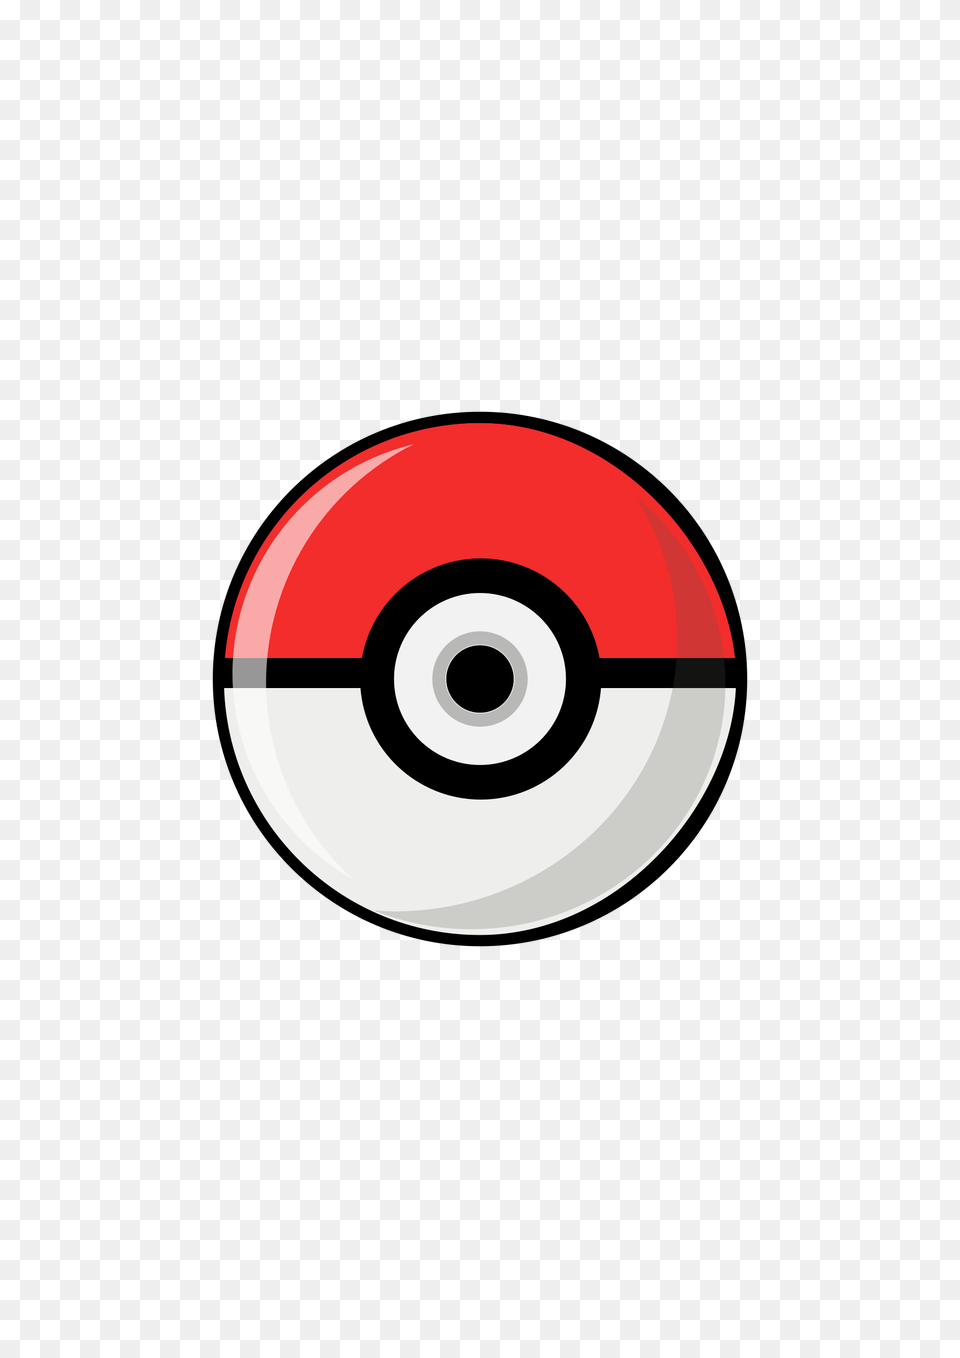 Pokemon Red Pokeball Clip Art Cliparts Free Transparent Png